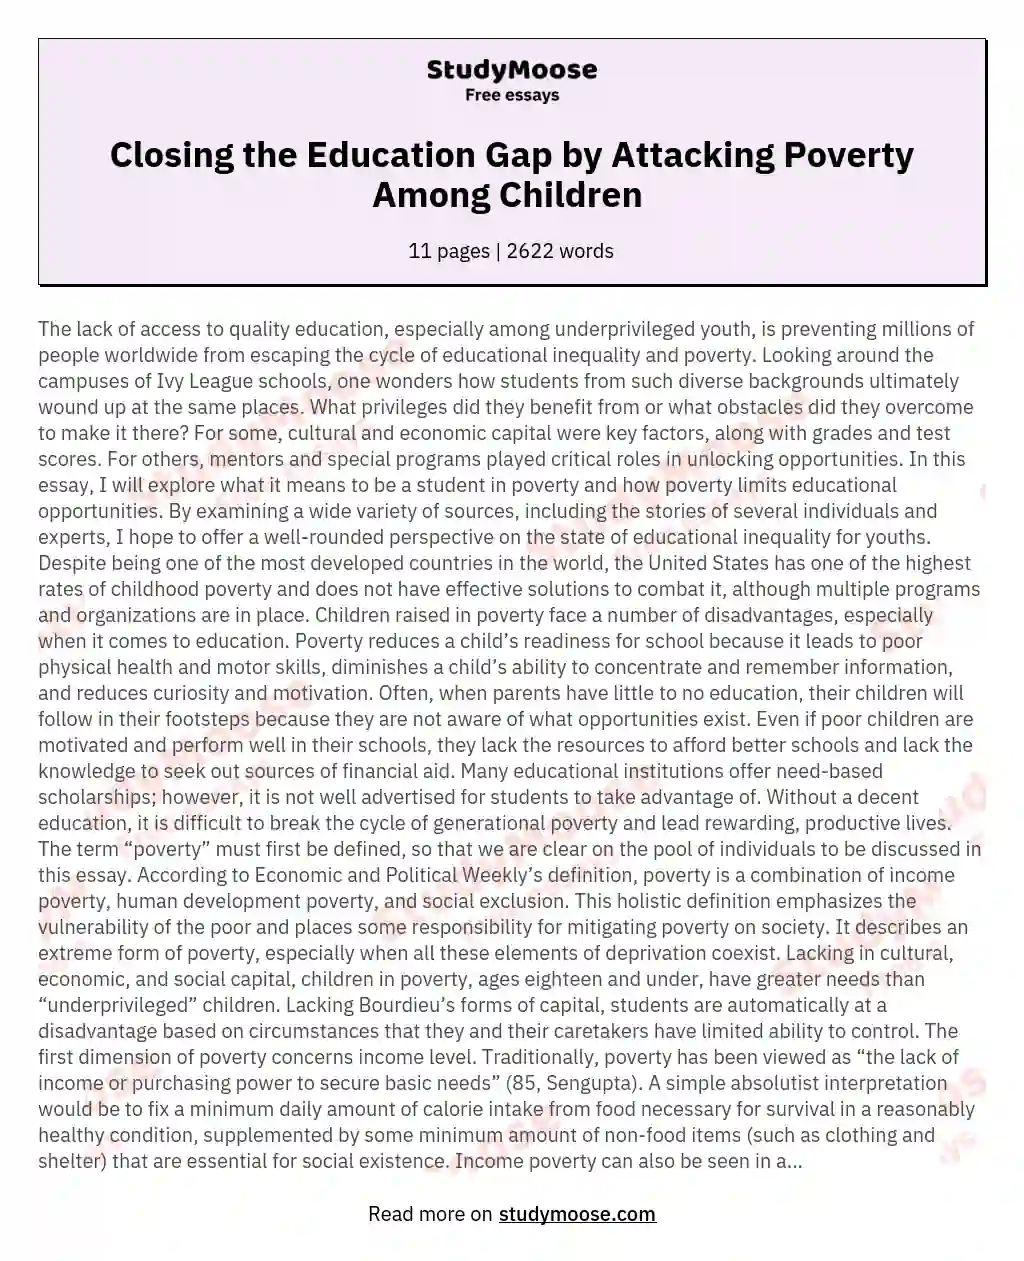 Closing the Education Gap by Attacking Poverty Among Children  essay